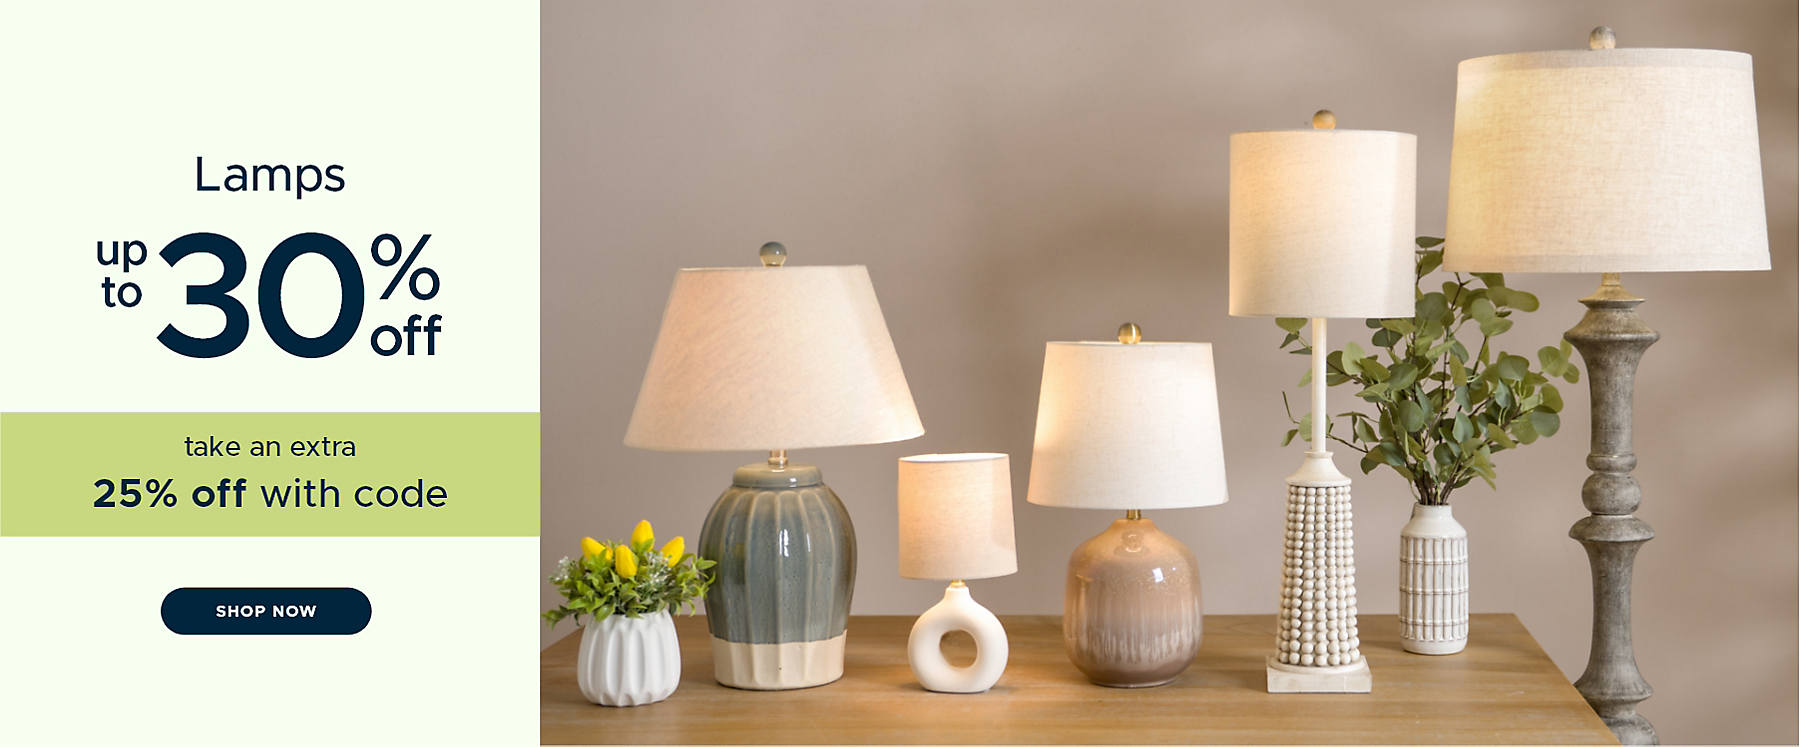 Lamps up to 30% off take an extra 25% off with code shop now